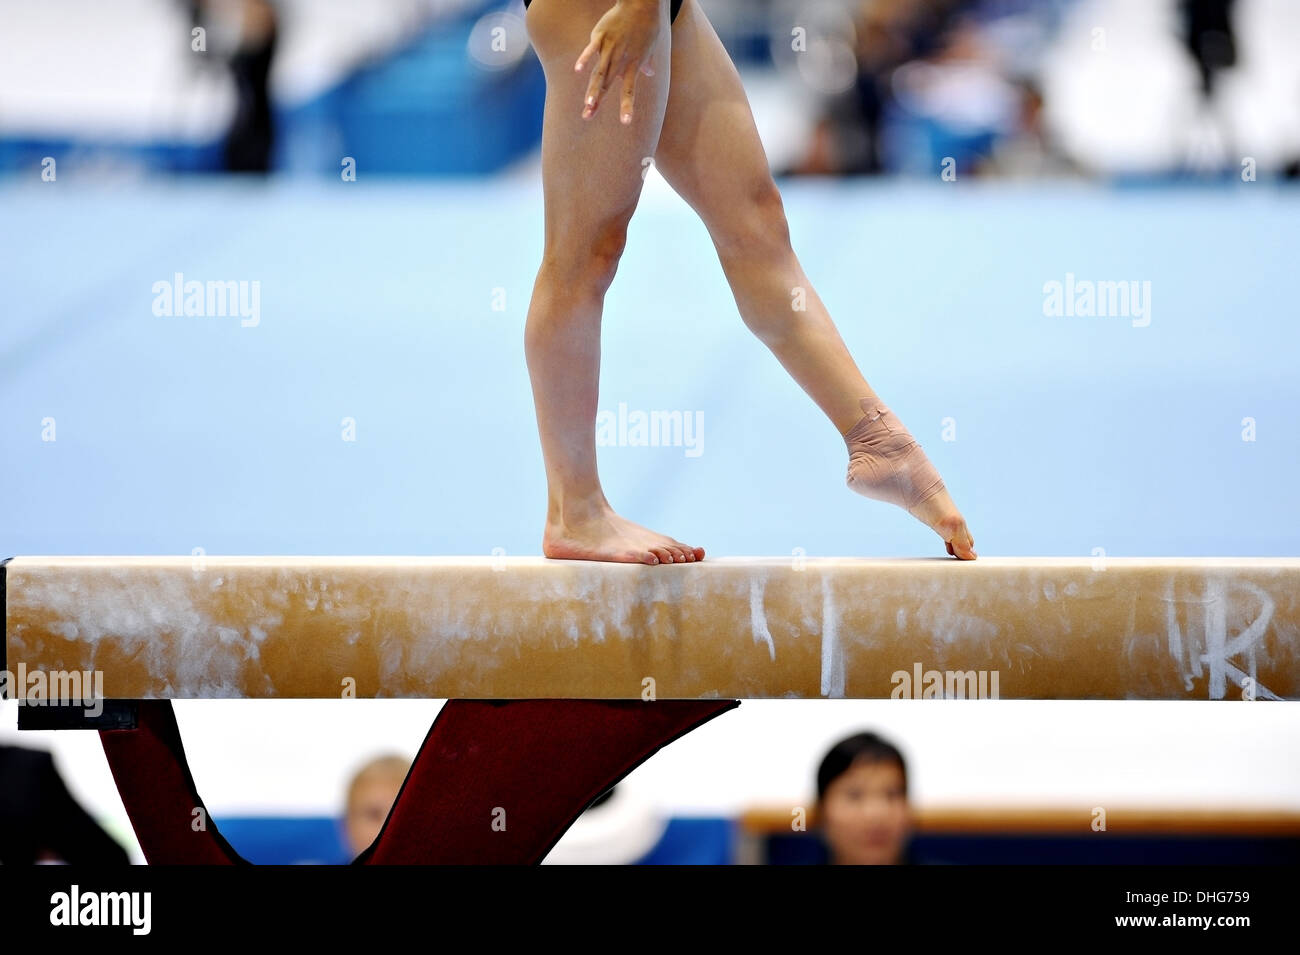 Legs of a gymnast are seen during an exercise on the balance beam apparatus Stock Photo